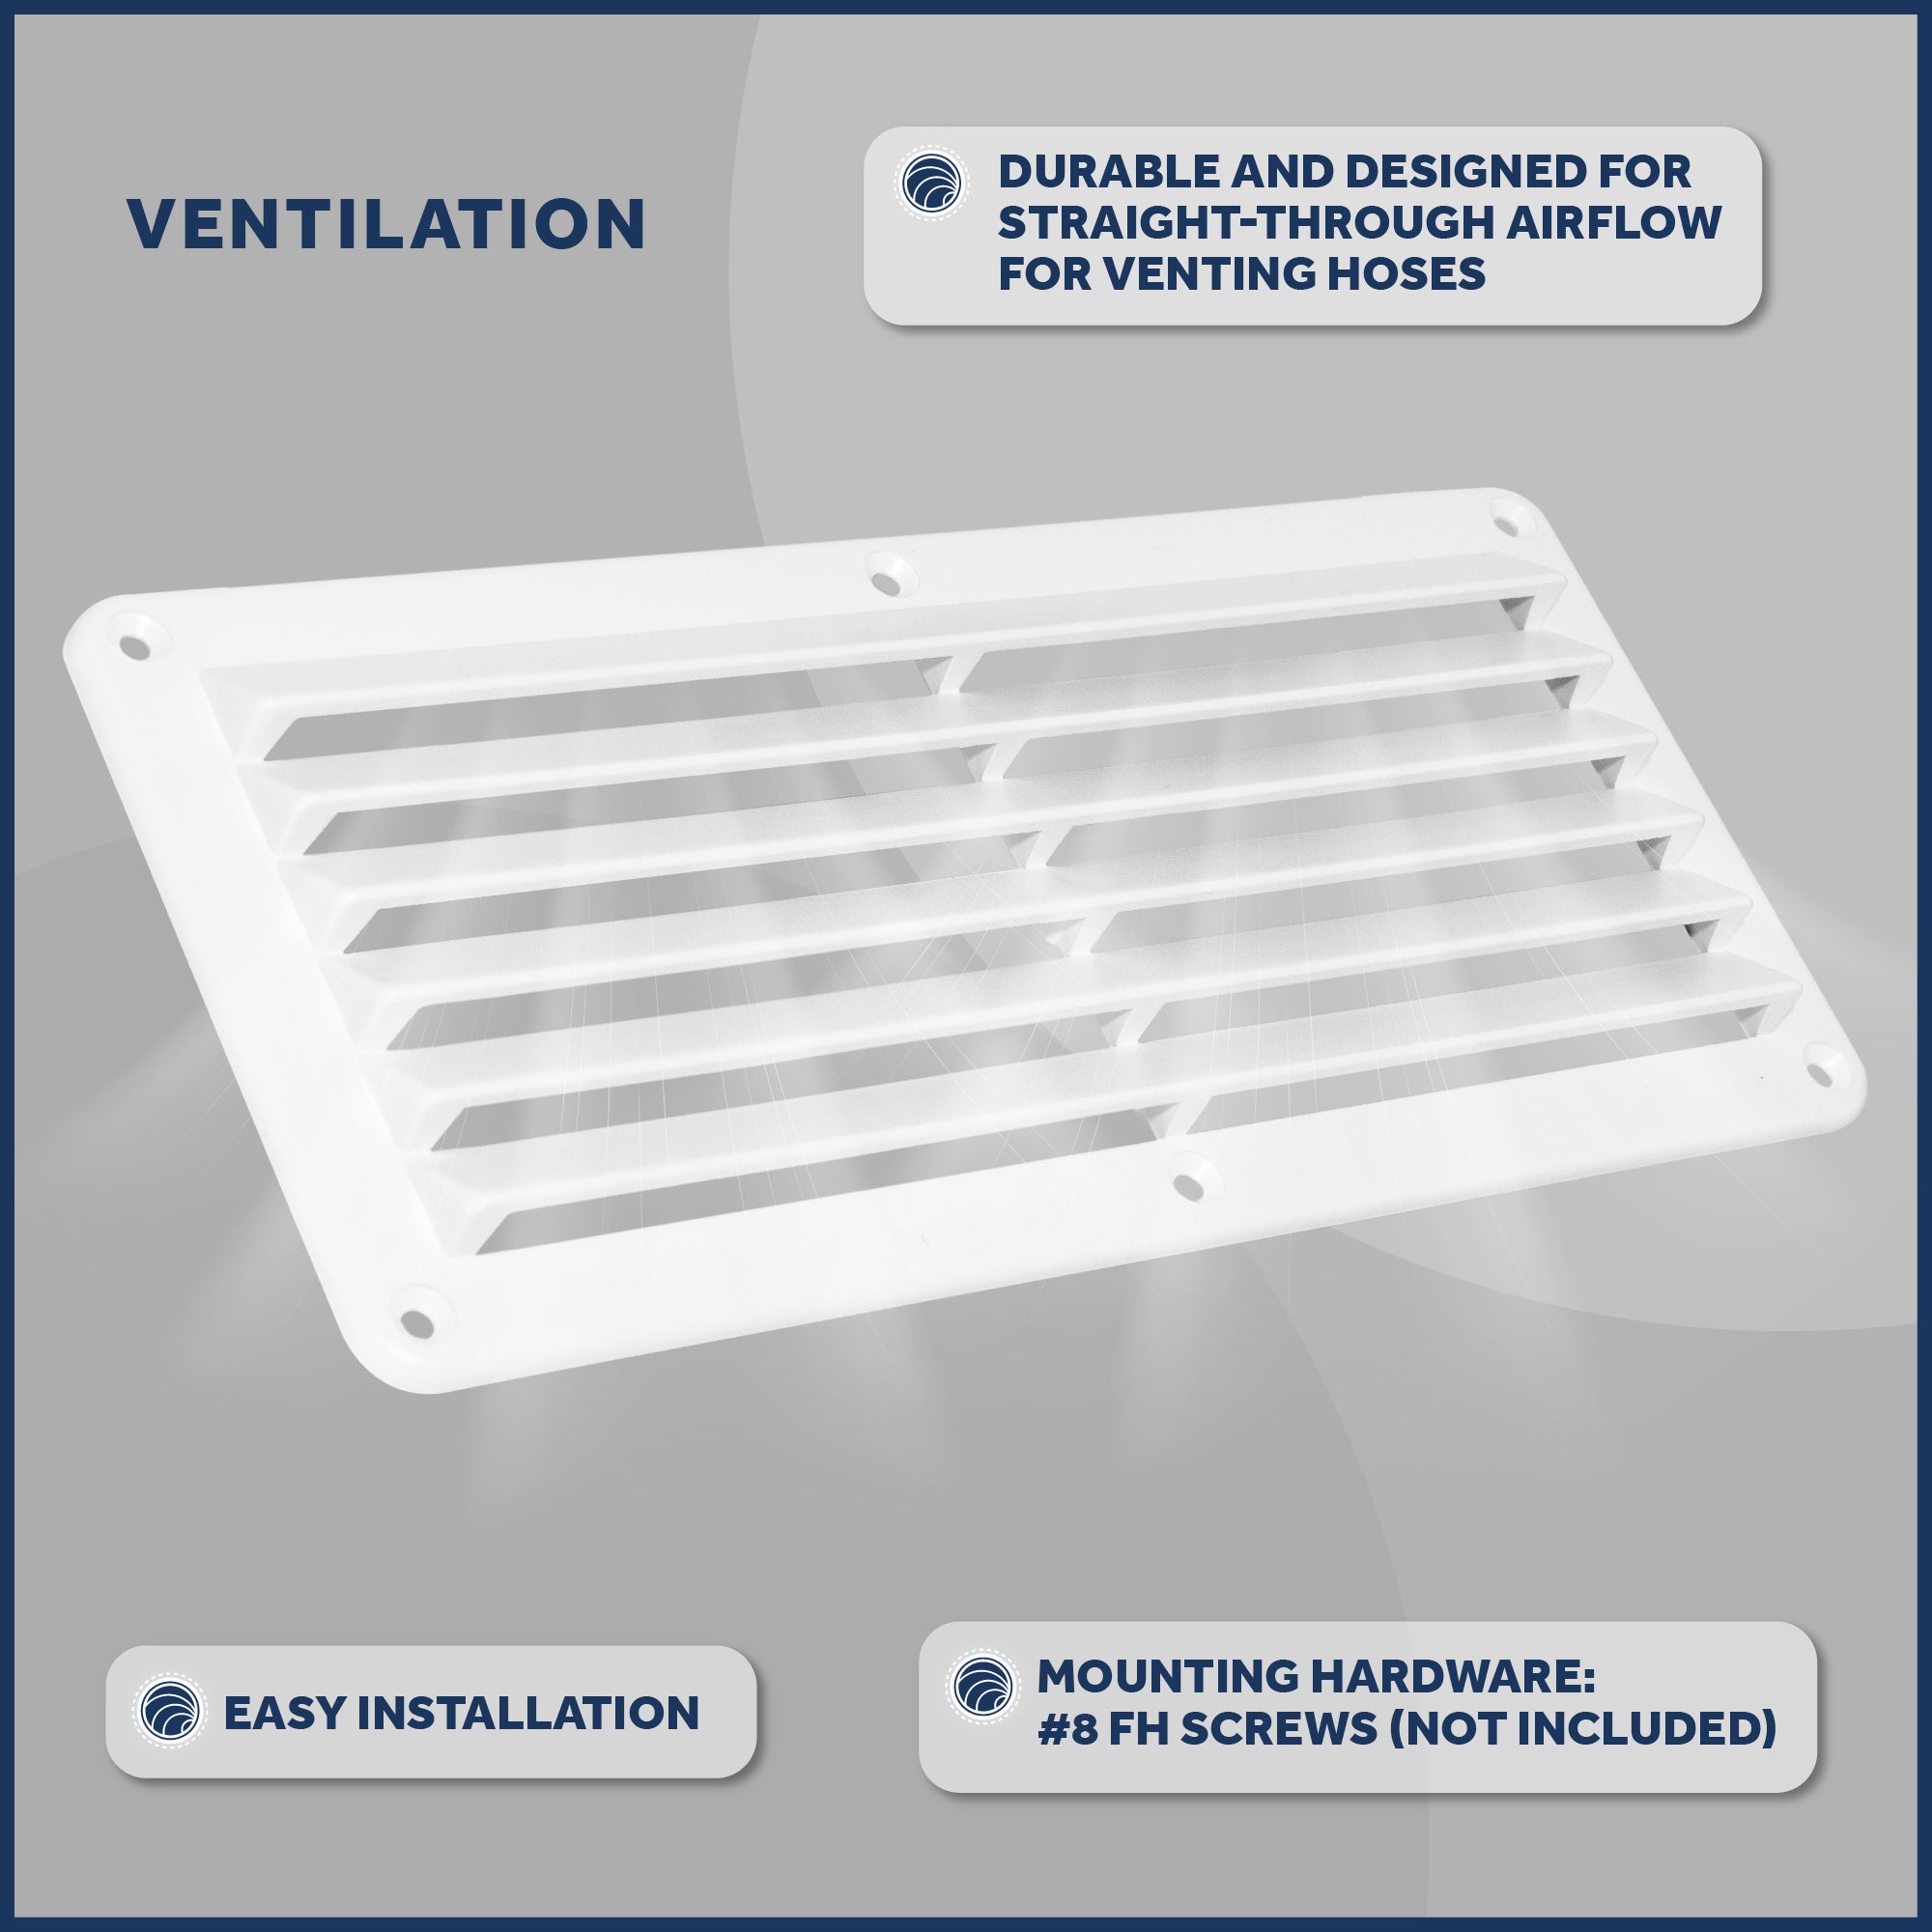 6-Slotted Louvered Ventilators, 4-7/8-Inch x 10-1/4-Inch, White ABS Plastic - FO590